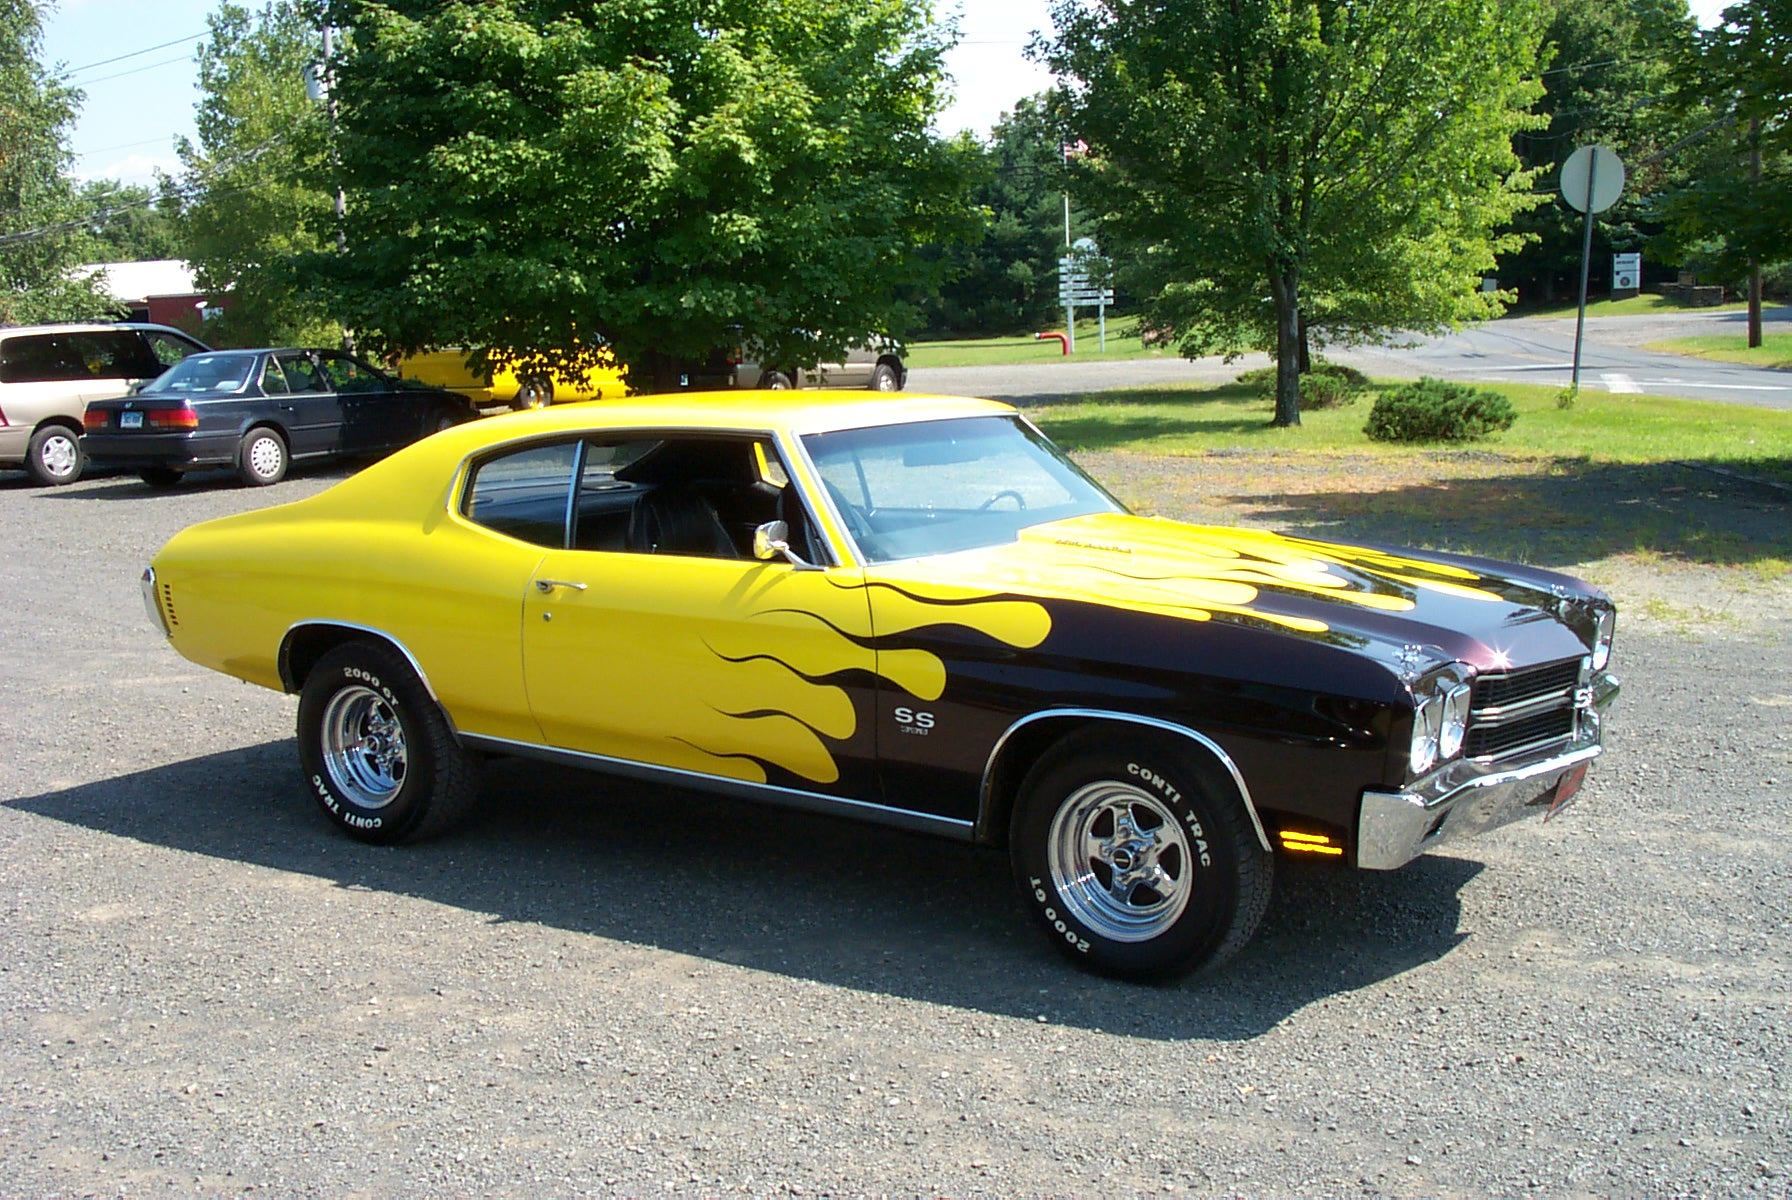 Muscle Cars Wallpaper on Cars Muscle Chevrolet Chevelle Ss Car Hd Wallpaper   Cars   Trucks